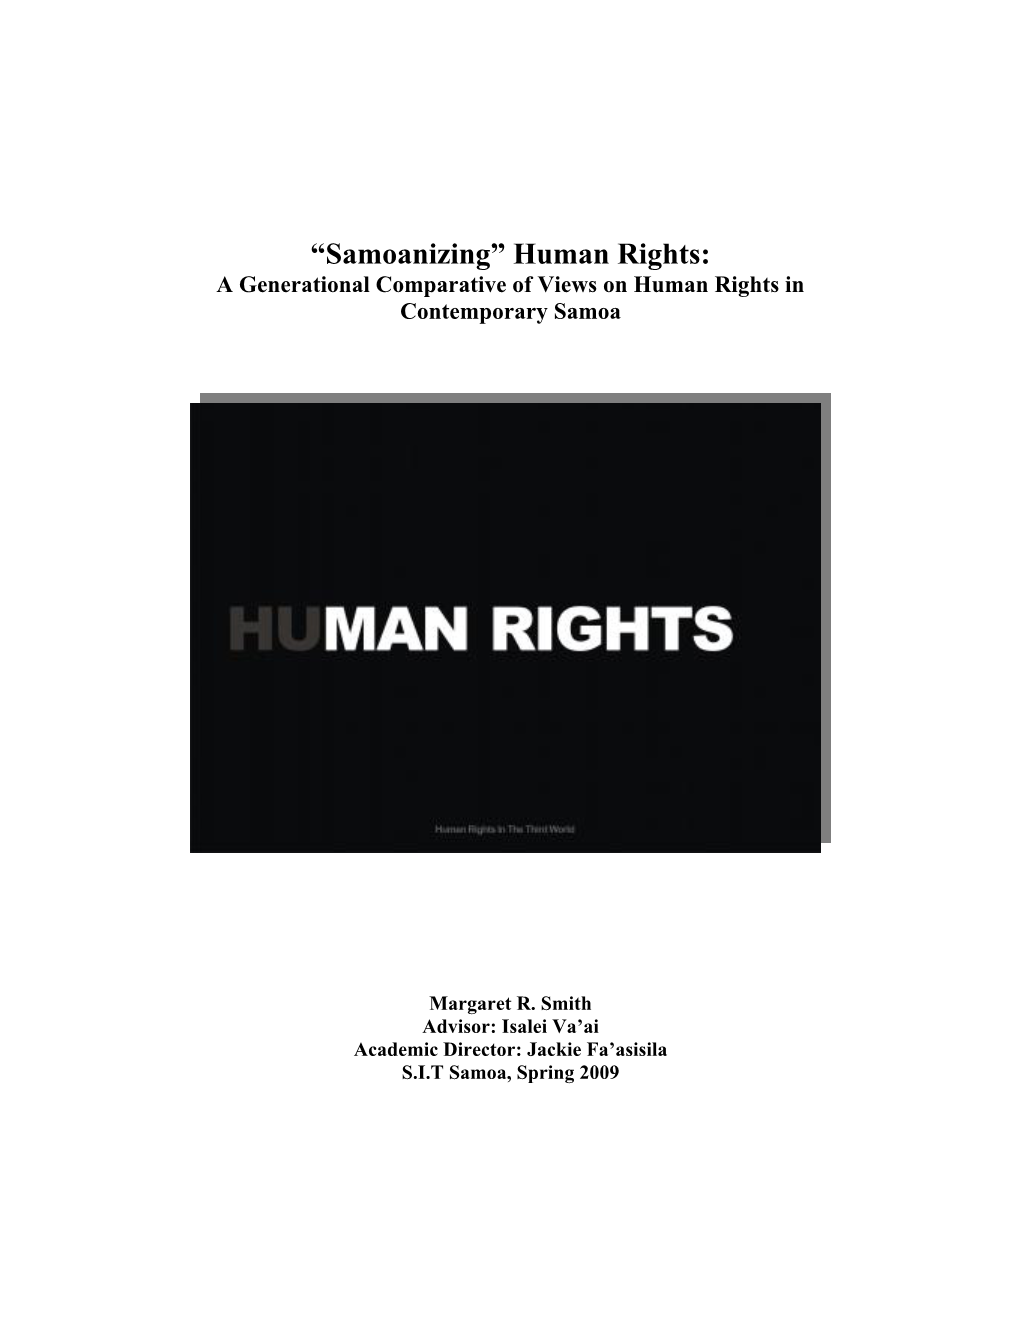 Human Rights: a Generational Comparative of Views on Human Rights in Contemporary Samoa